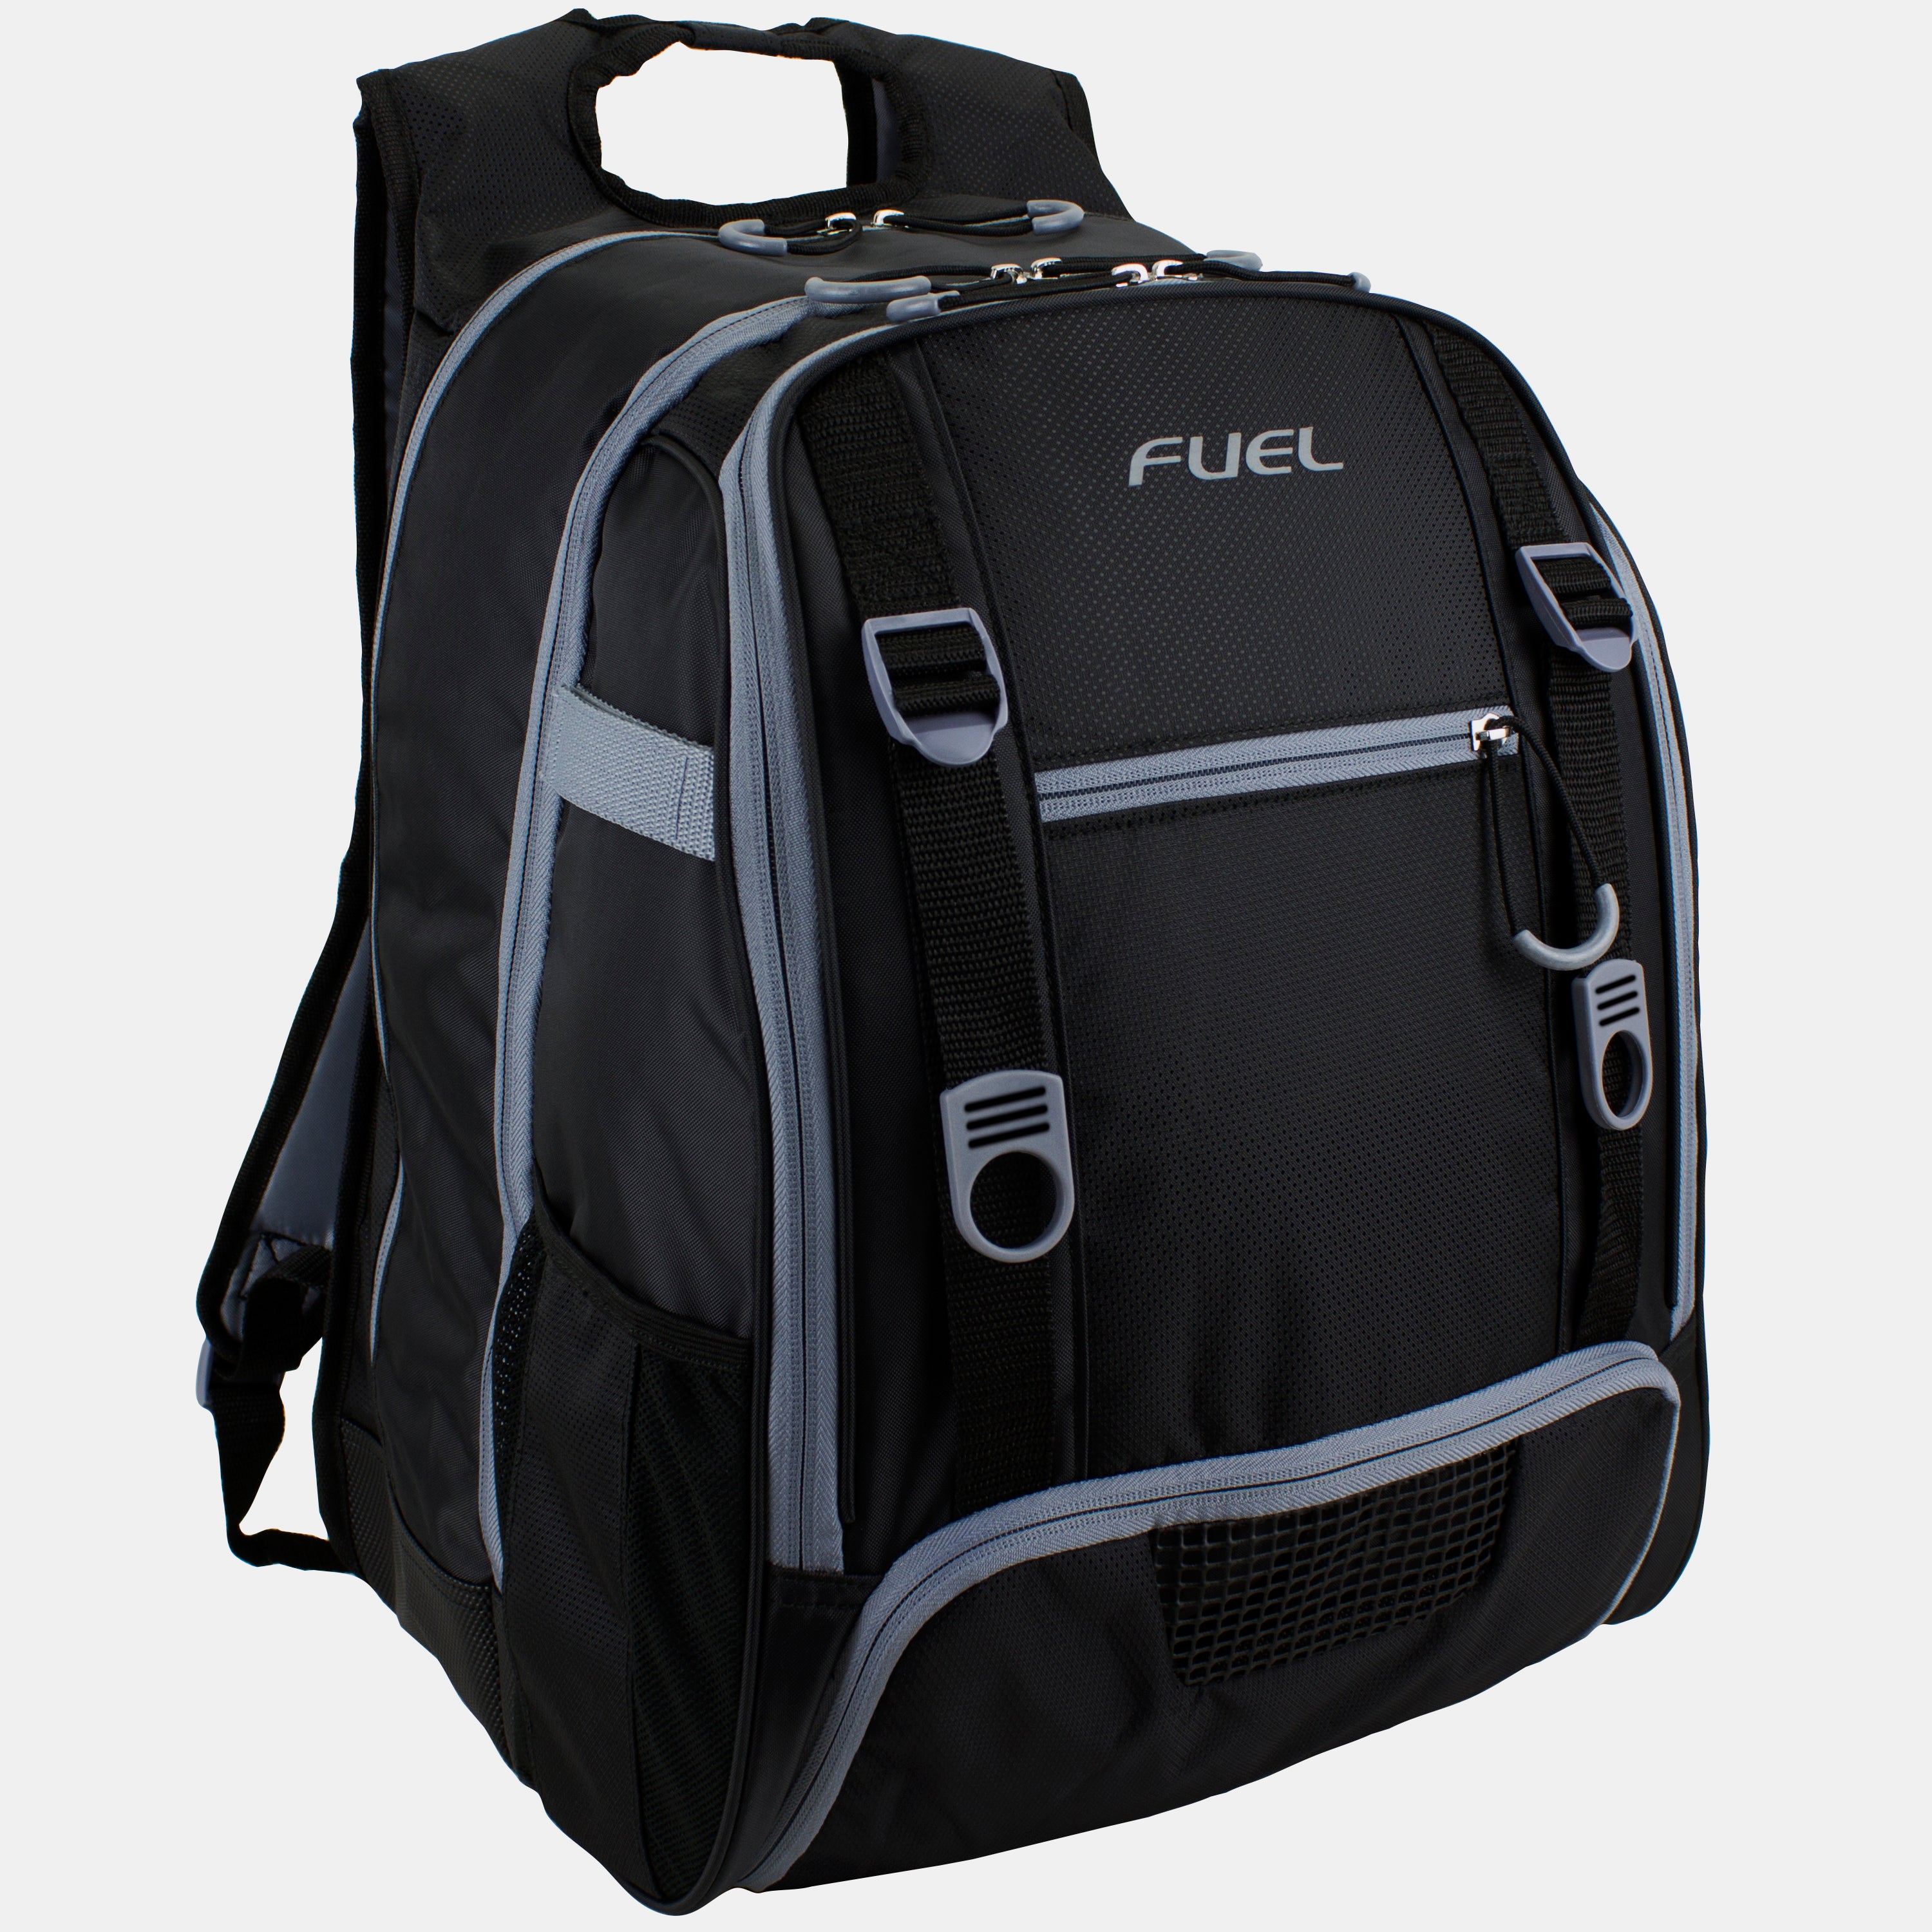 Fuel All Sport Backpack